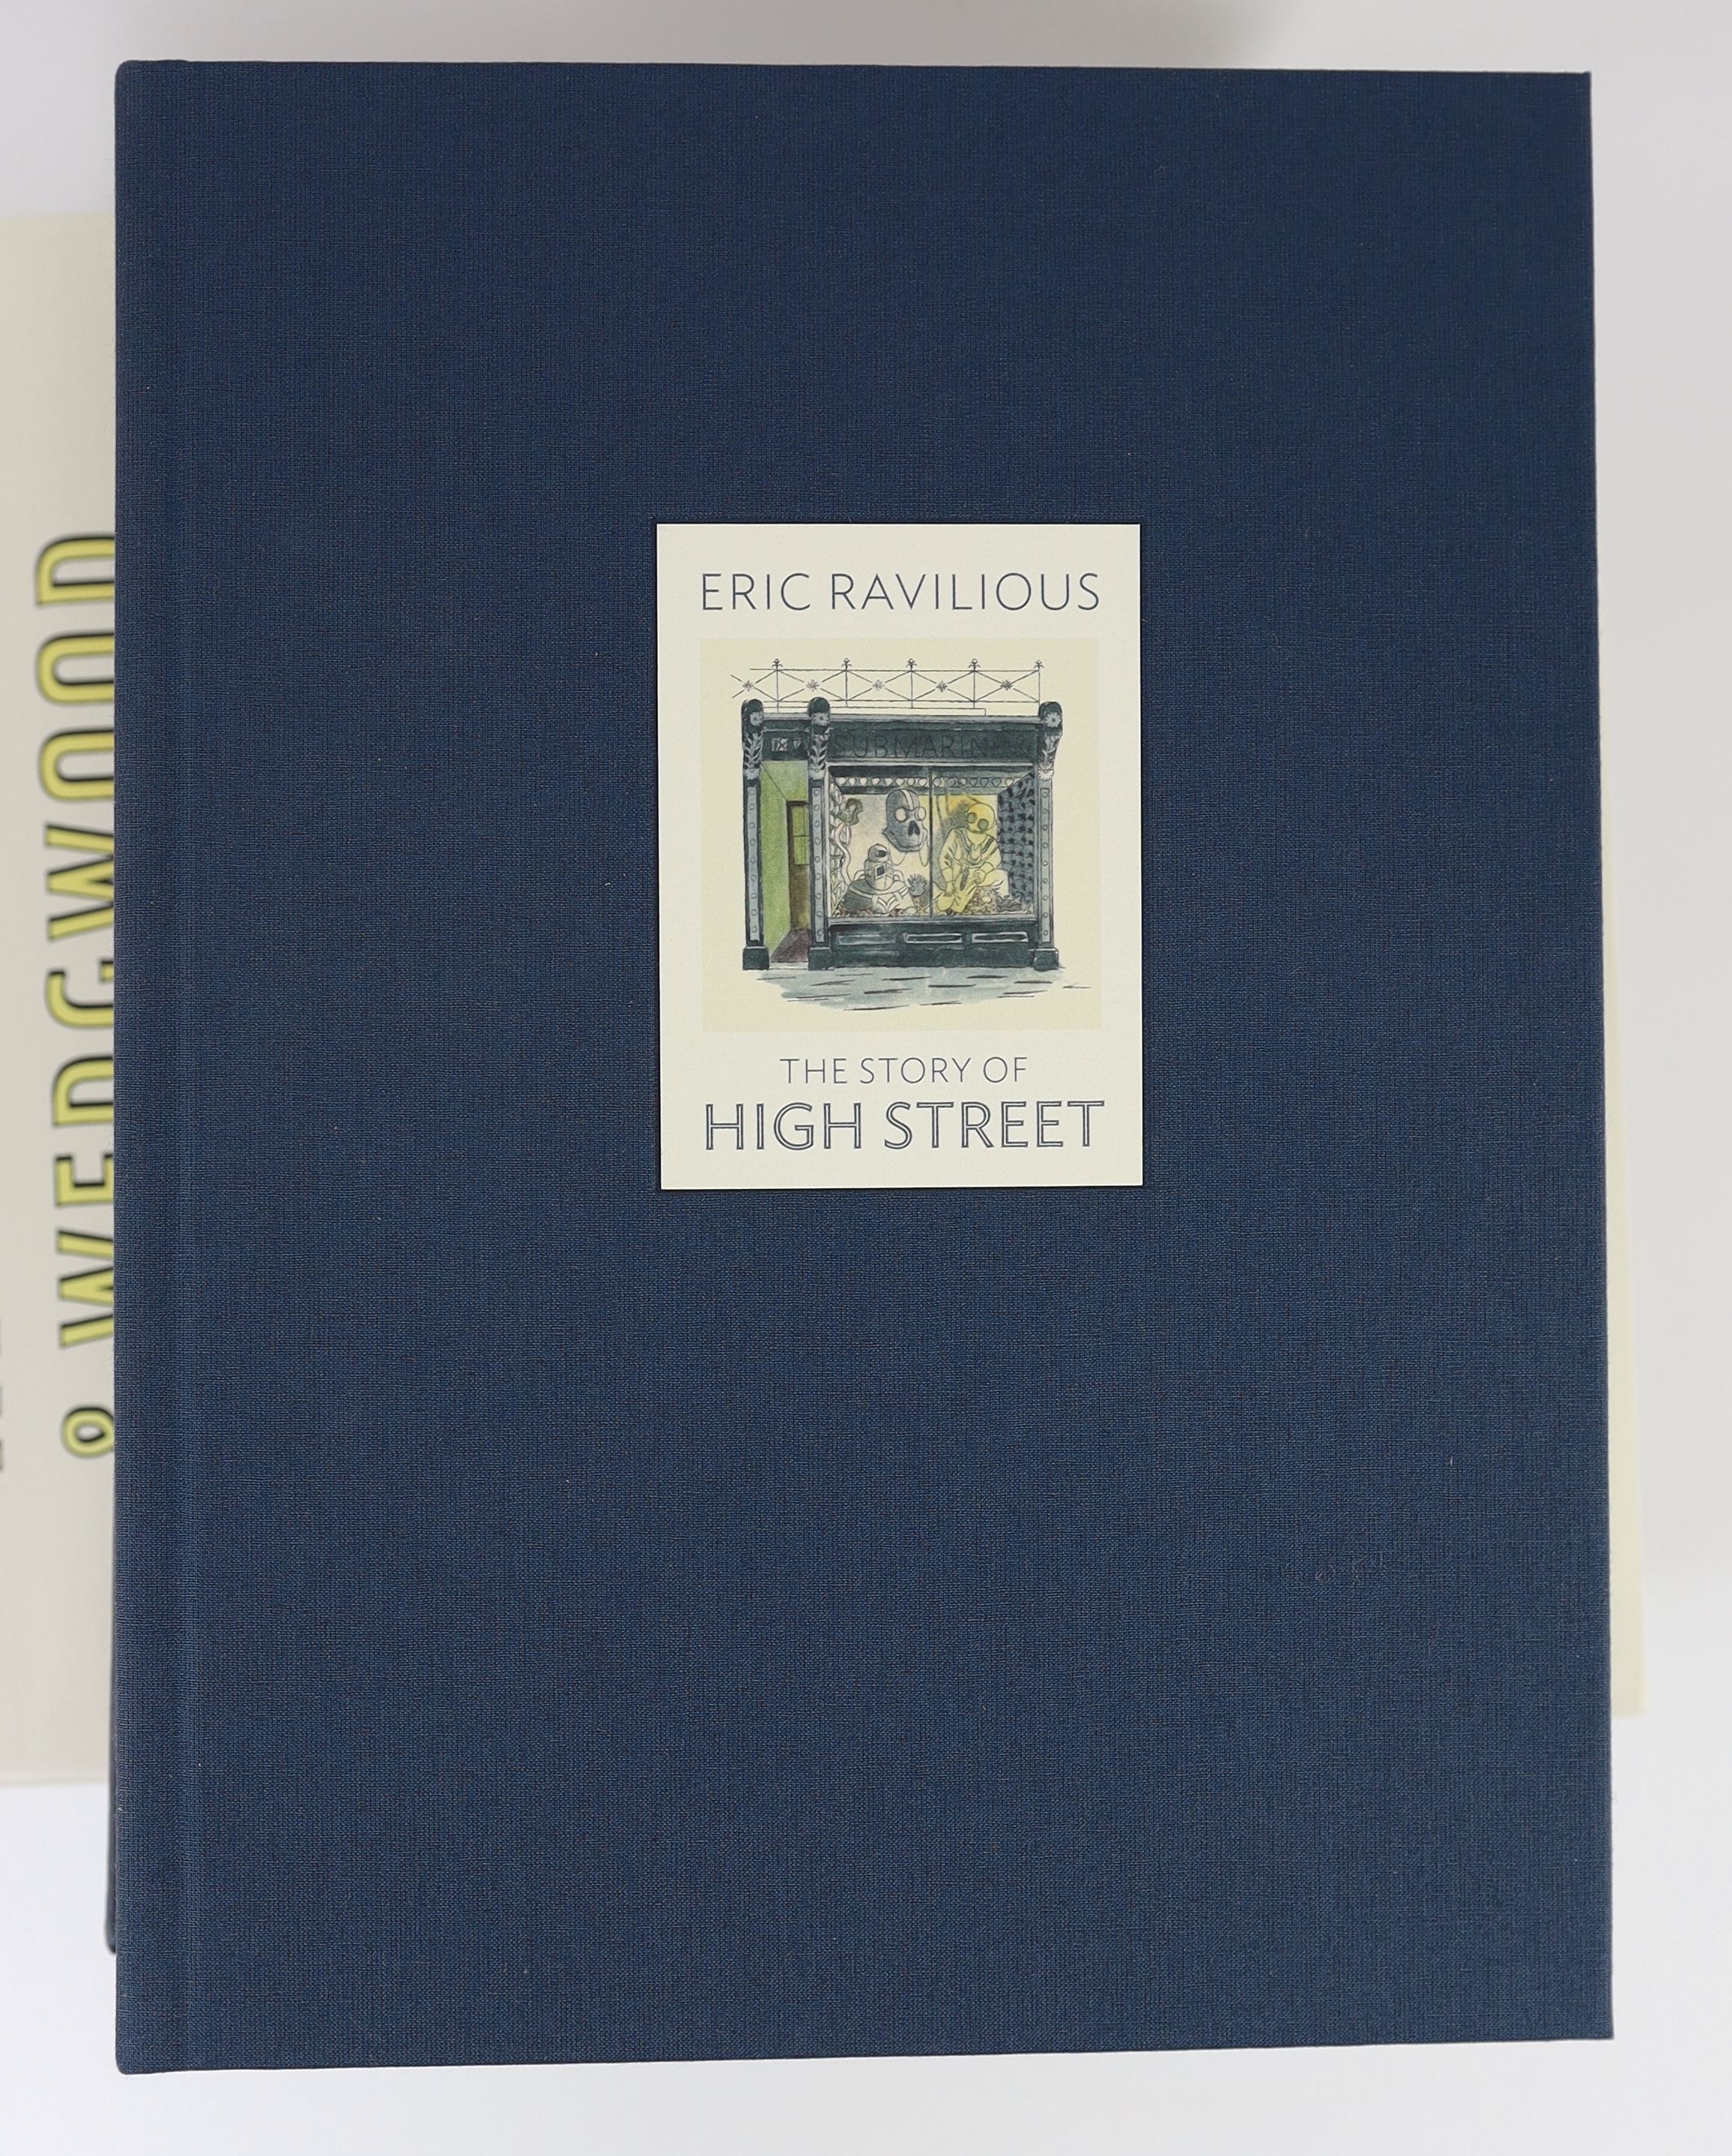 Ravilious, Eric - 6 works, about or Illustrated by:- Ravilious - The Complete Wedgwood Designs of Eric Ravilious, Dalrymple Press, 1986; Ullmann, Anne (editor) - Ravilious at War, The Fleece Press, Upper Denby, 2002; Pow